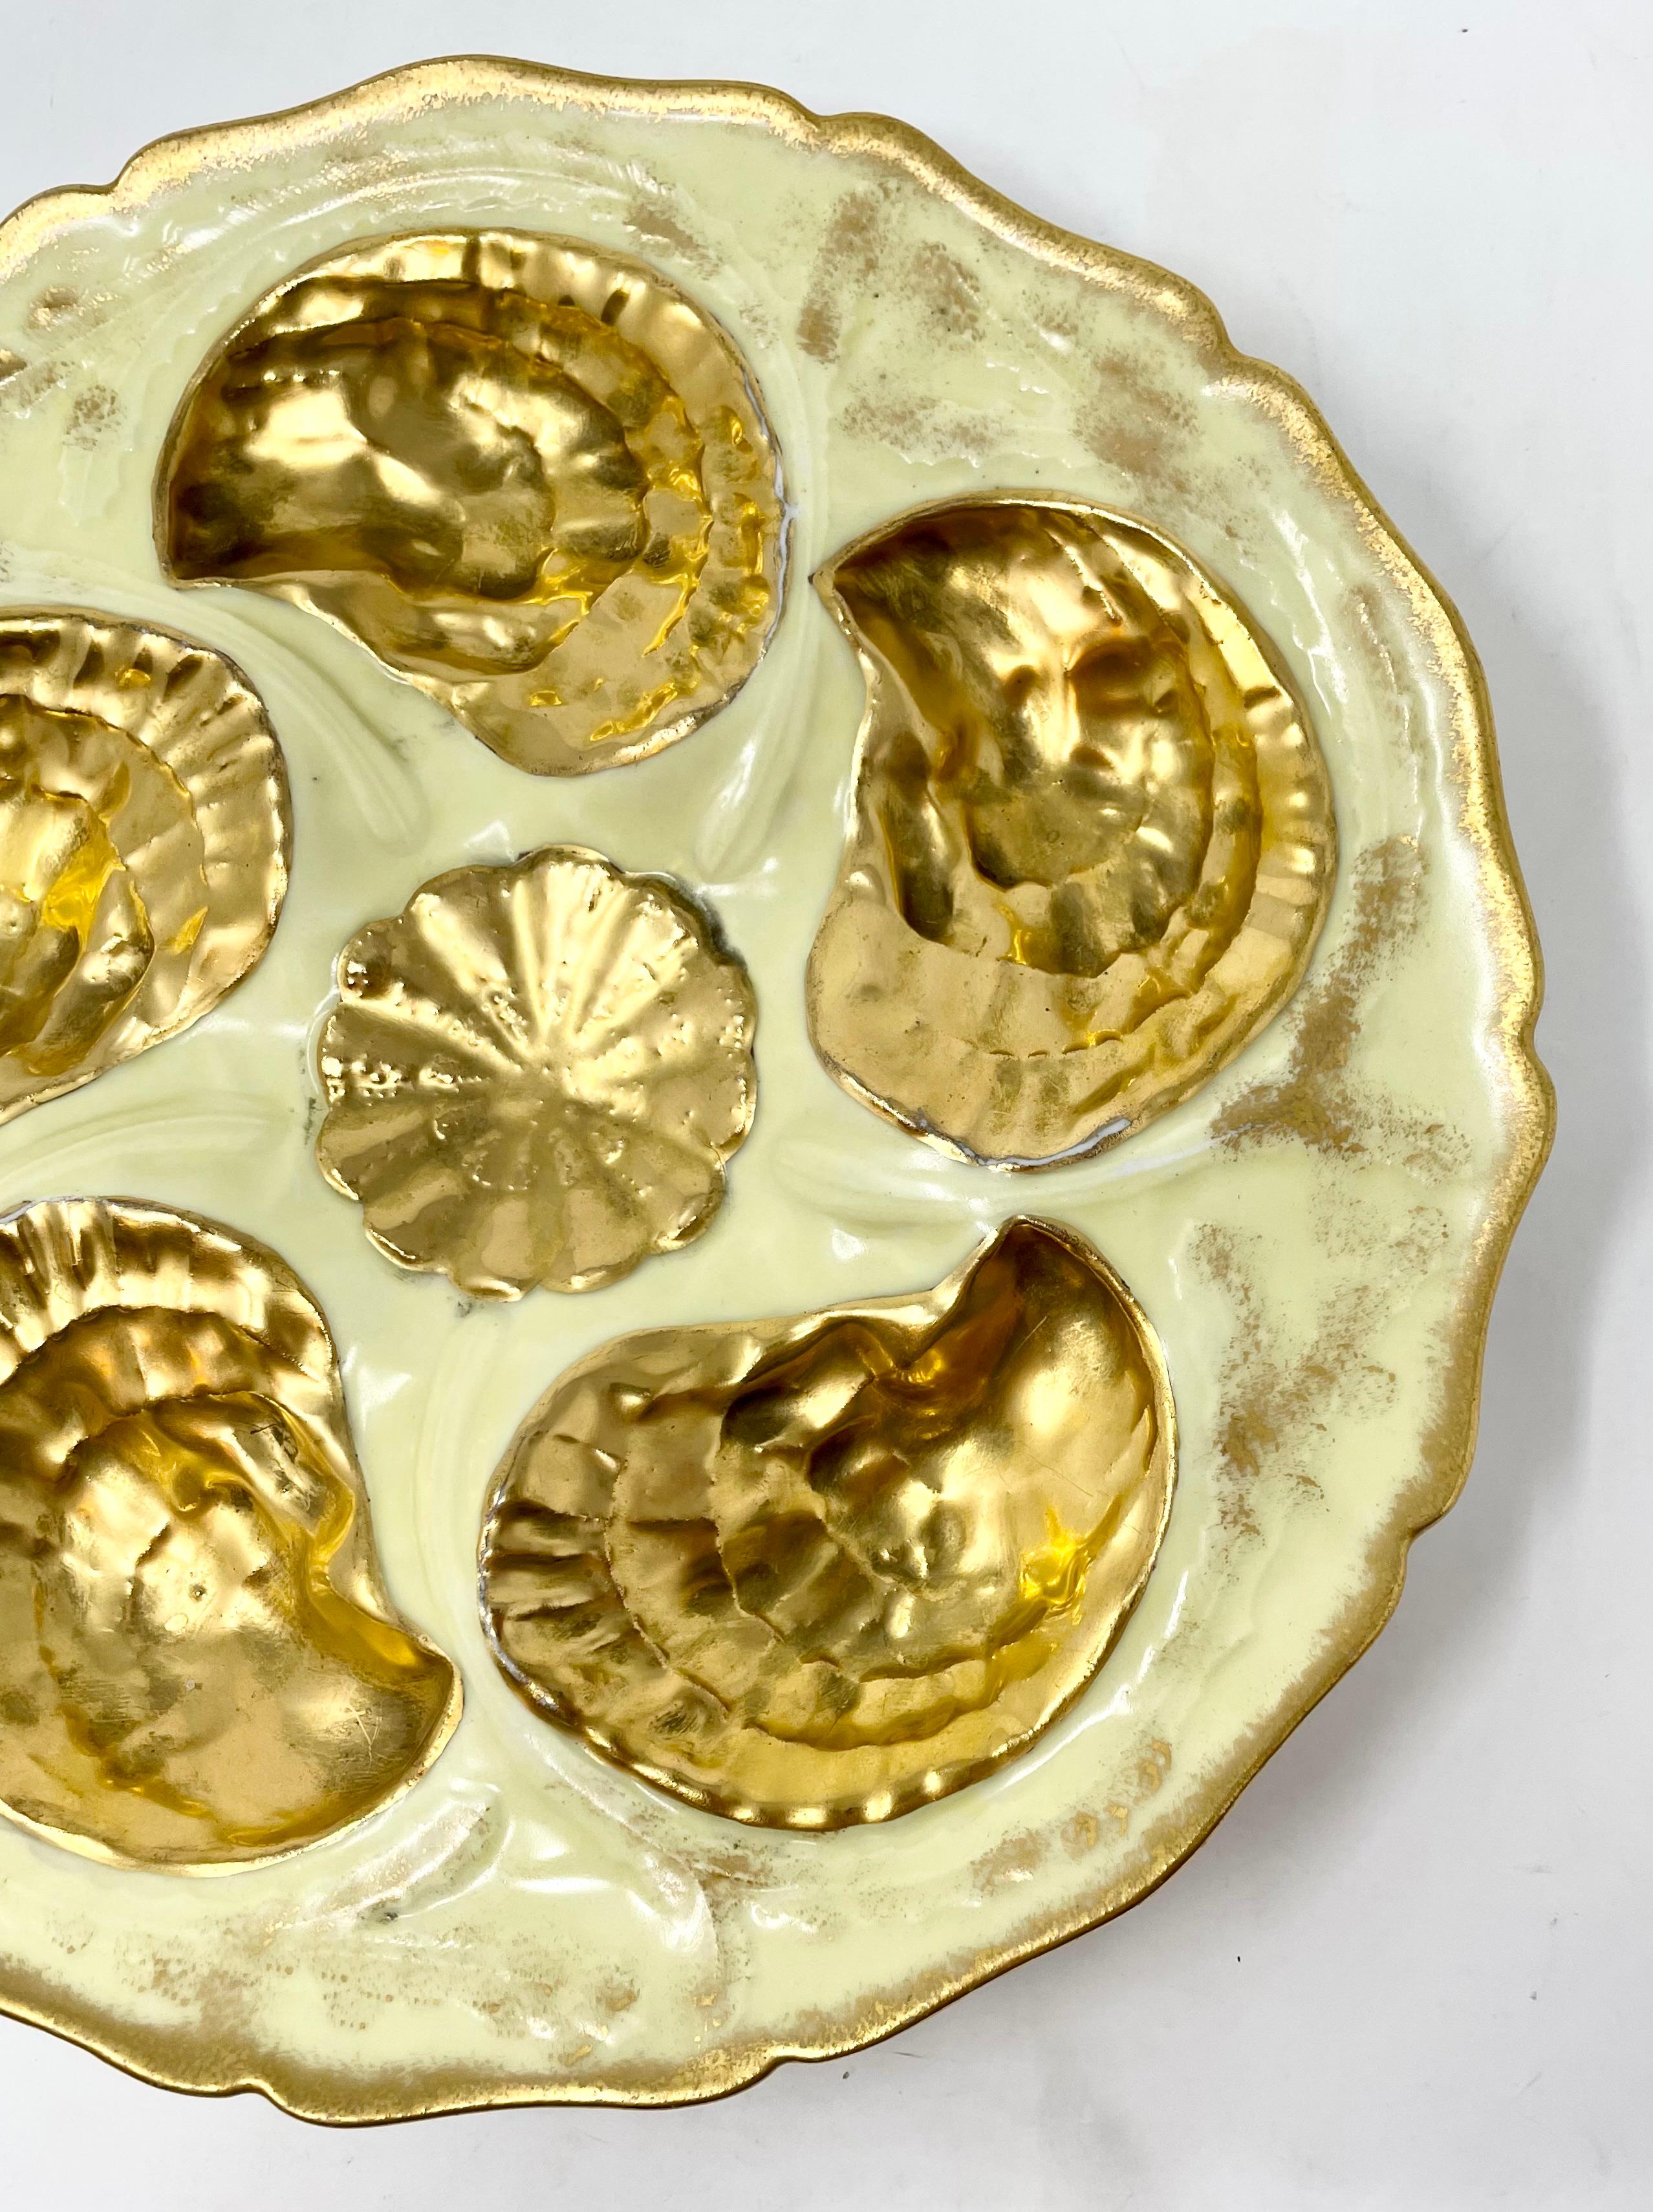 Antique French hand-decorated porcelain oyster plate in rare yellow color with fine gold detail, signed 